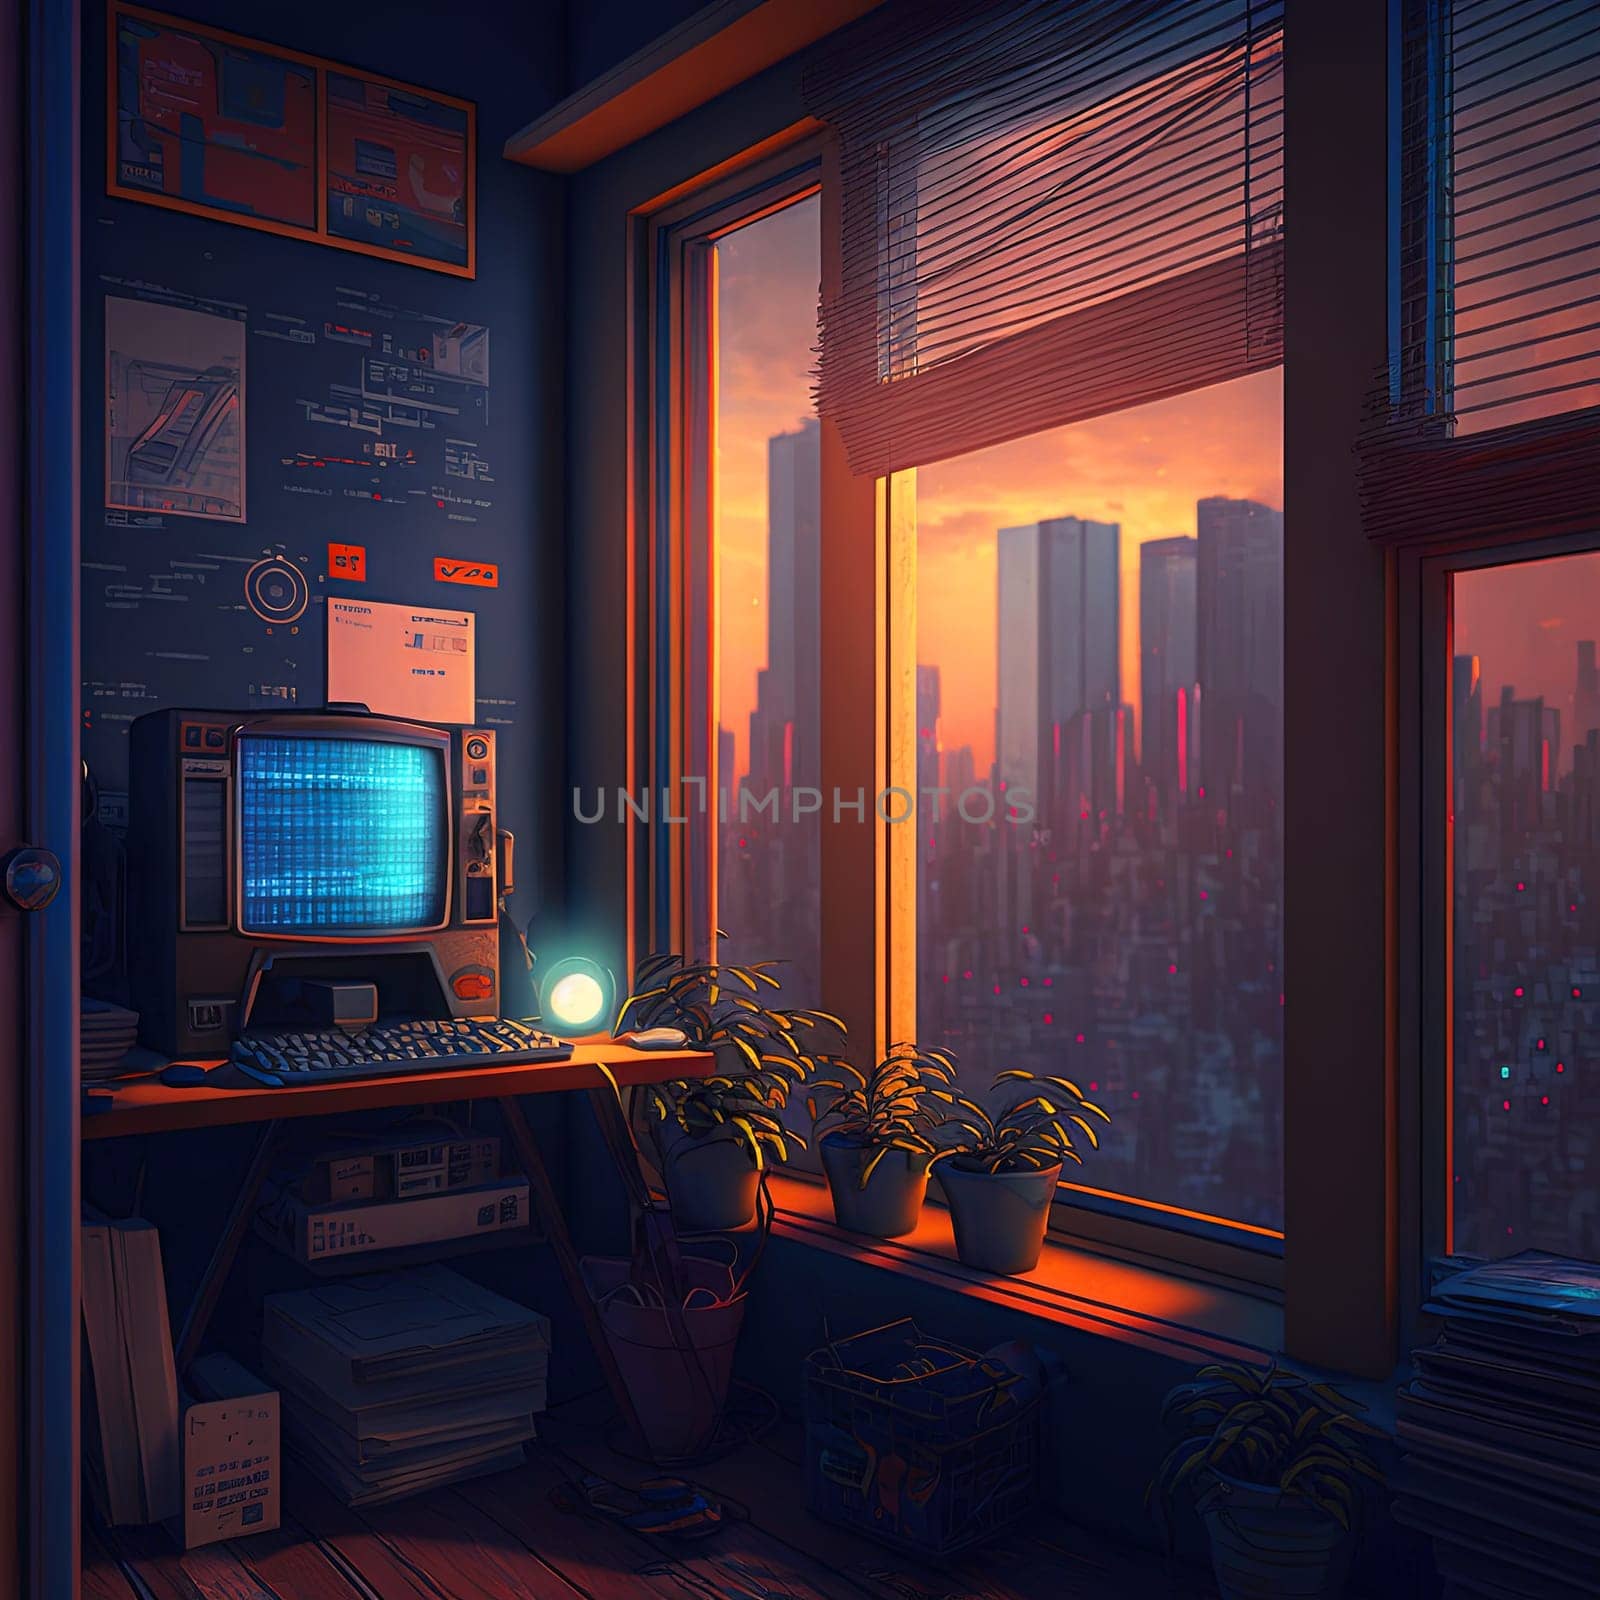 Nostalgic retro room in 80s synthwave or cyberpunk style. Futuristic neon interior of the 90s styled apartment with tv screen or computer monitor